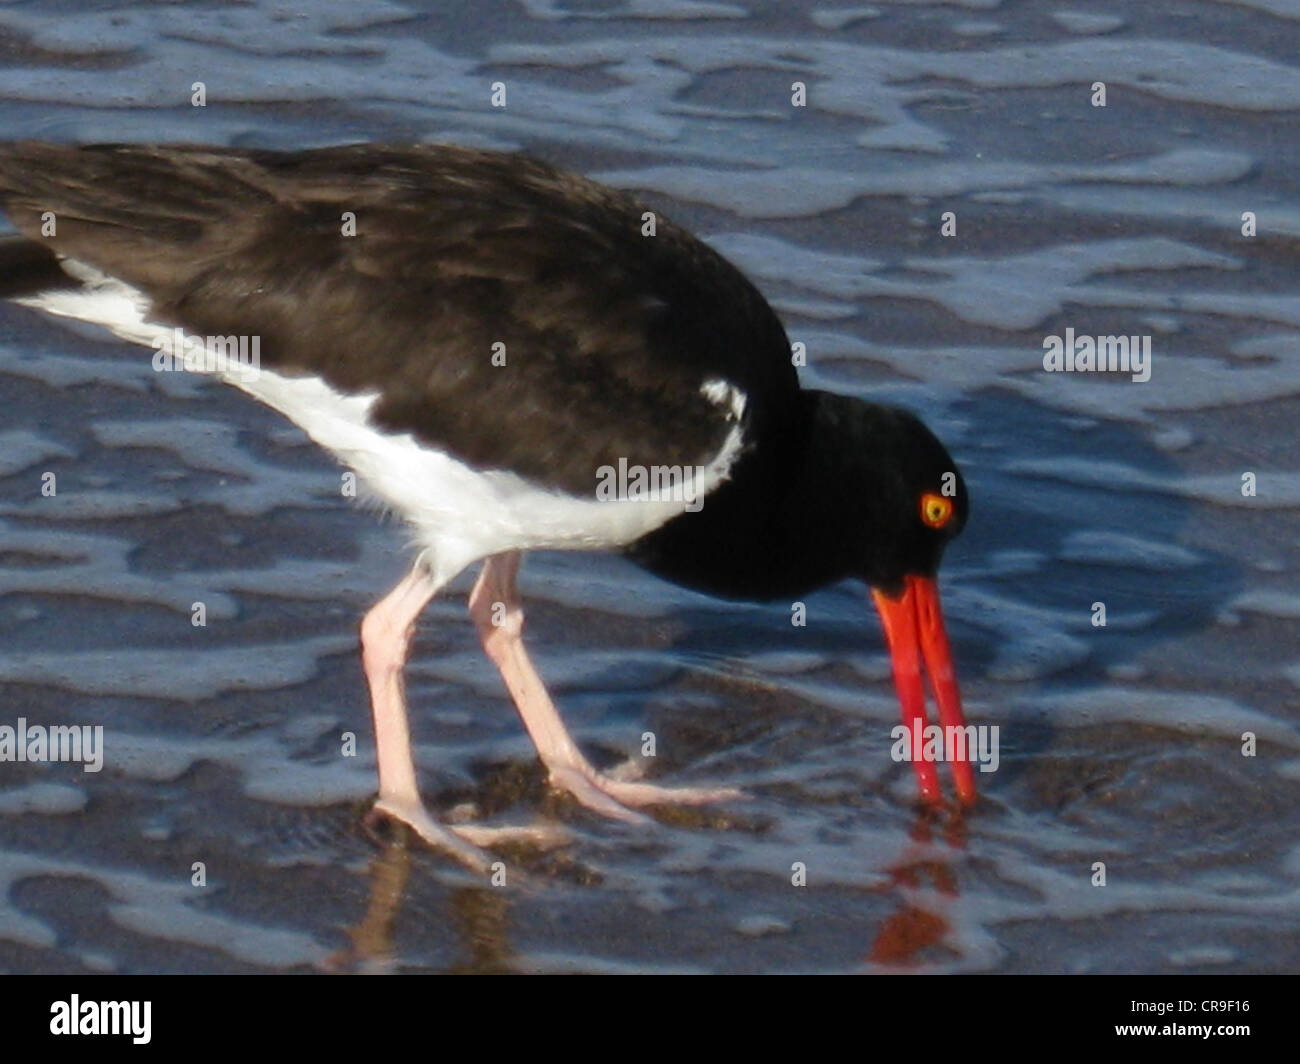 Oyster catcher with red bill in water Stock Photo